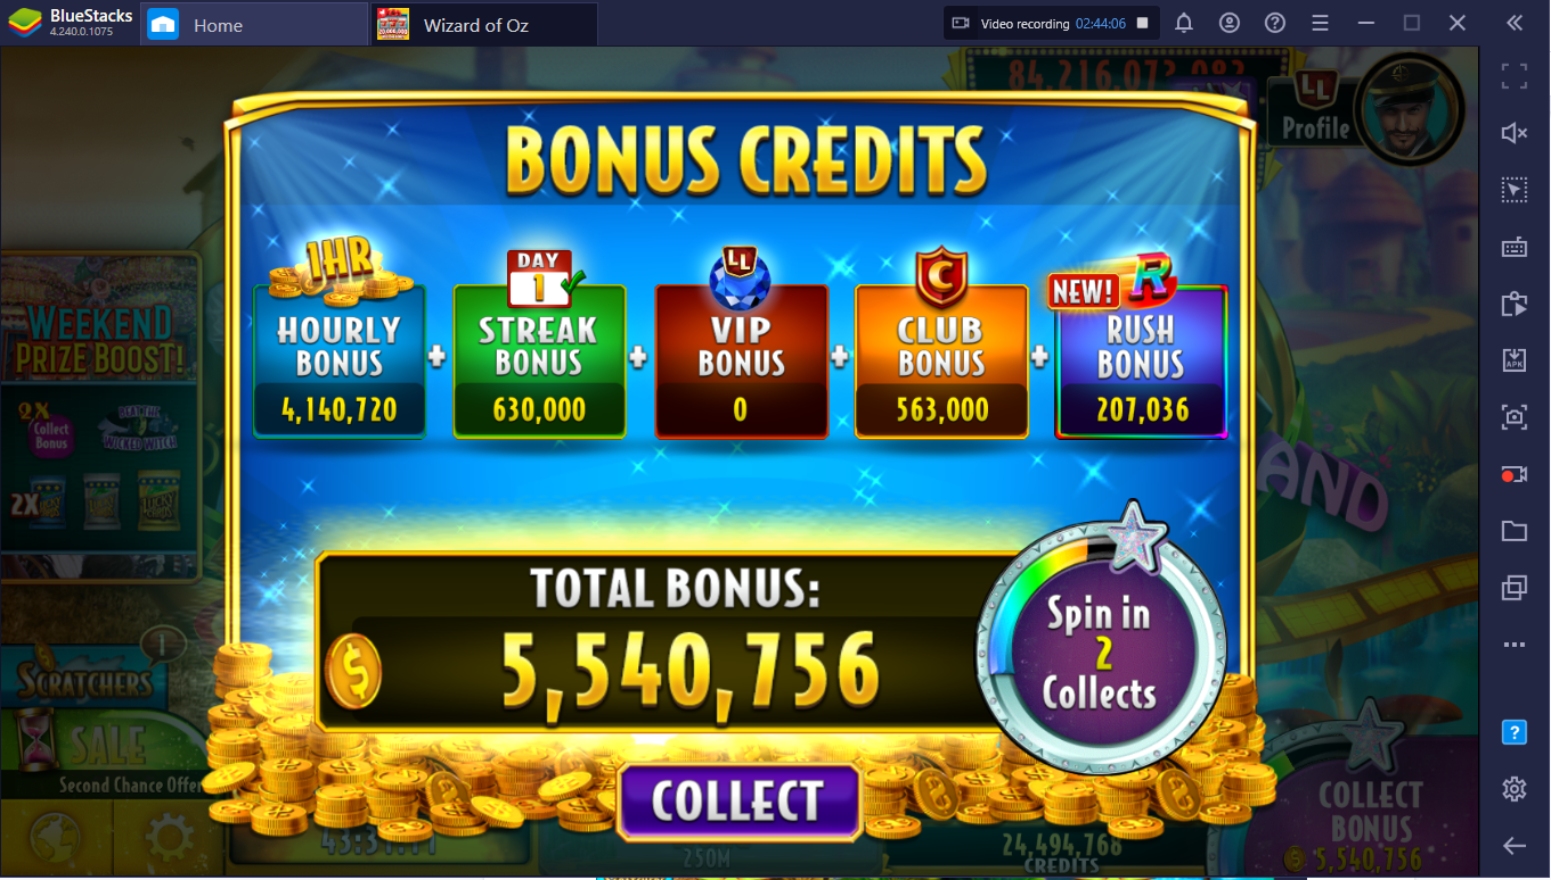 Fastest Way To Get Free Credits in Wizard of Oz Casino on PC